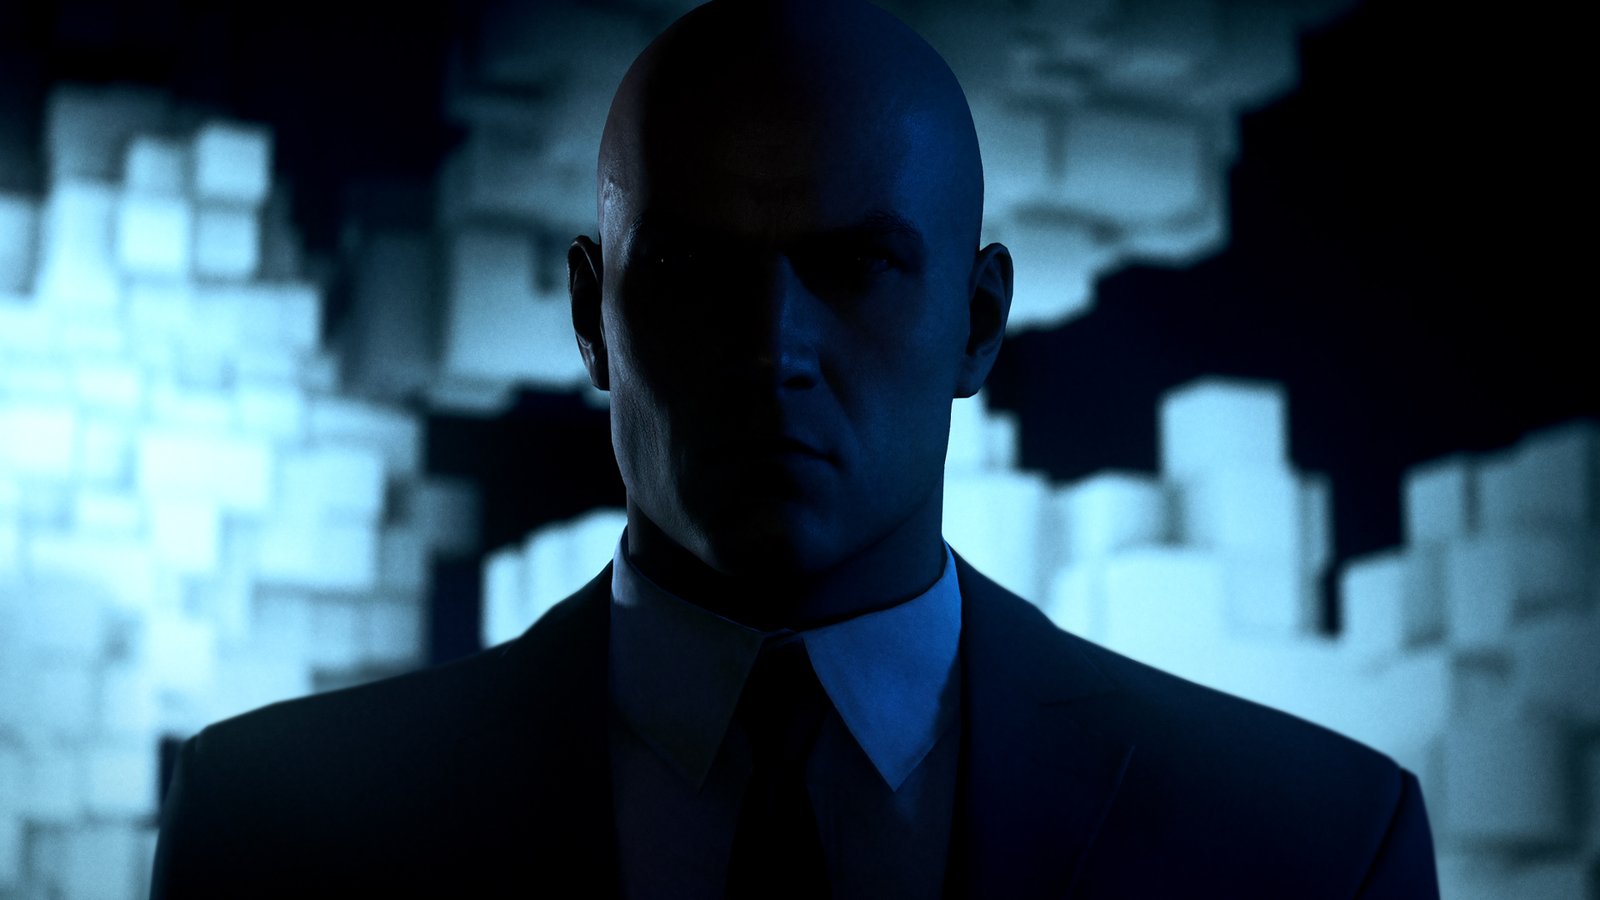 Hitman 3 VR coming to Game Pass - lacks support for Reverb G2?